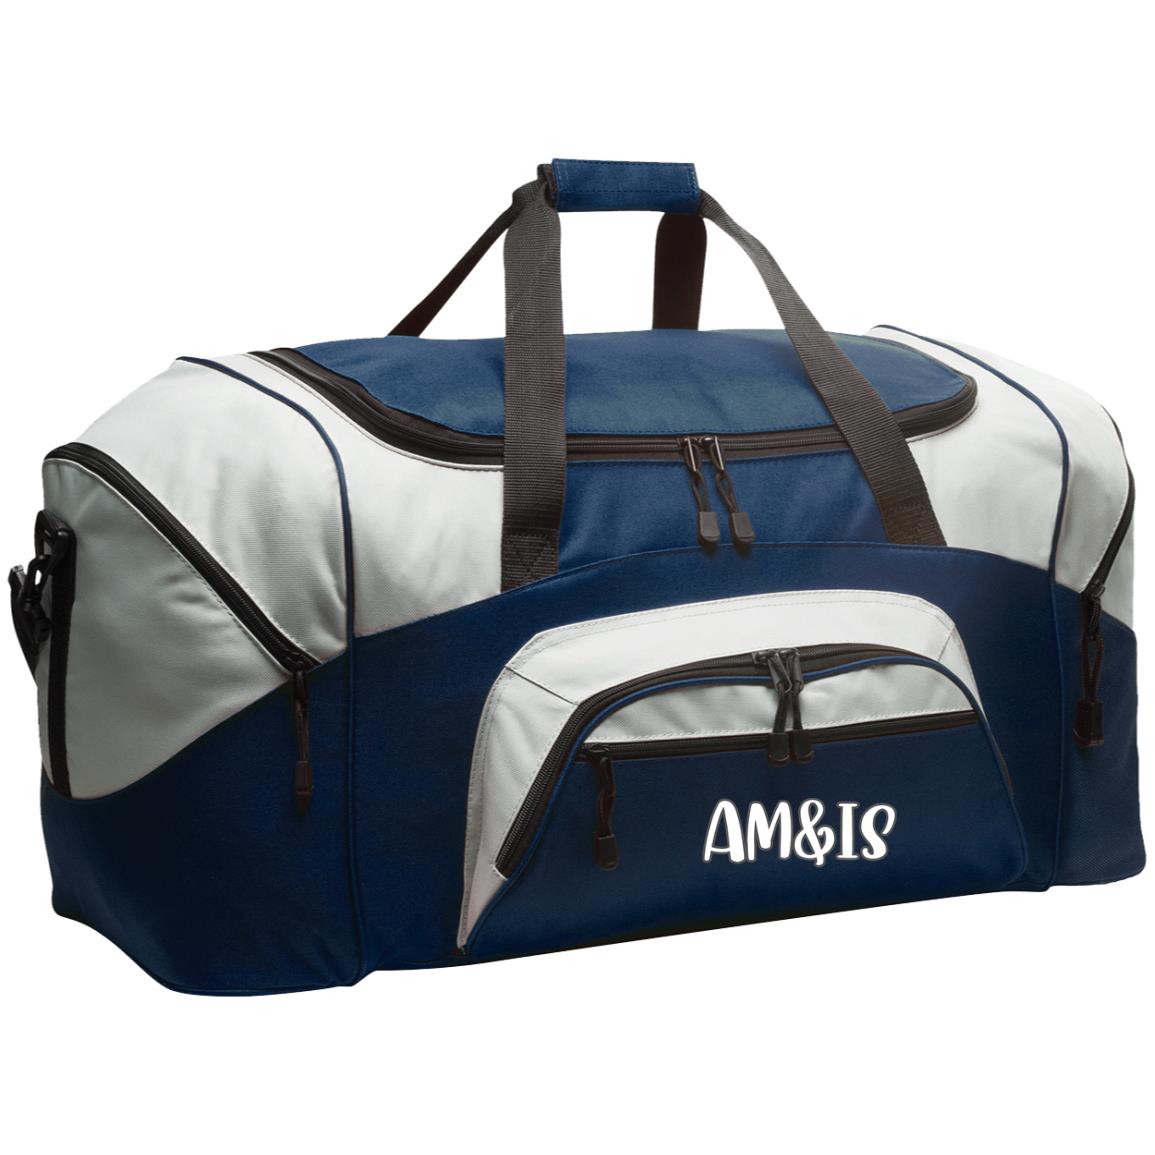 NAVY/GRAY ONE SIZE - AM&IS Activewear Colorblock Sport Duffel - duffel bag at TFC&H Co.